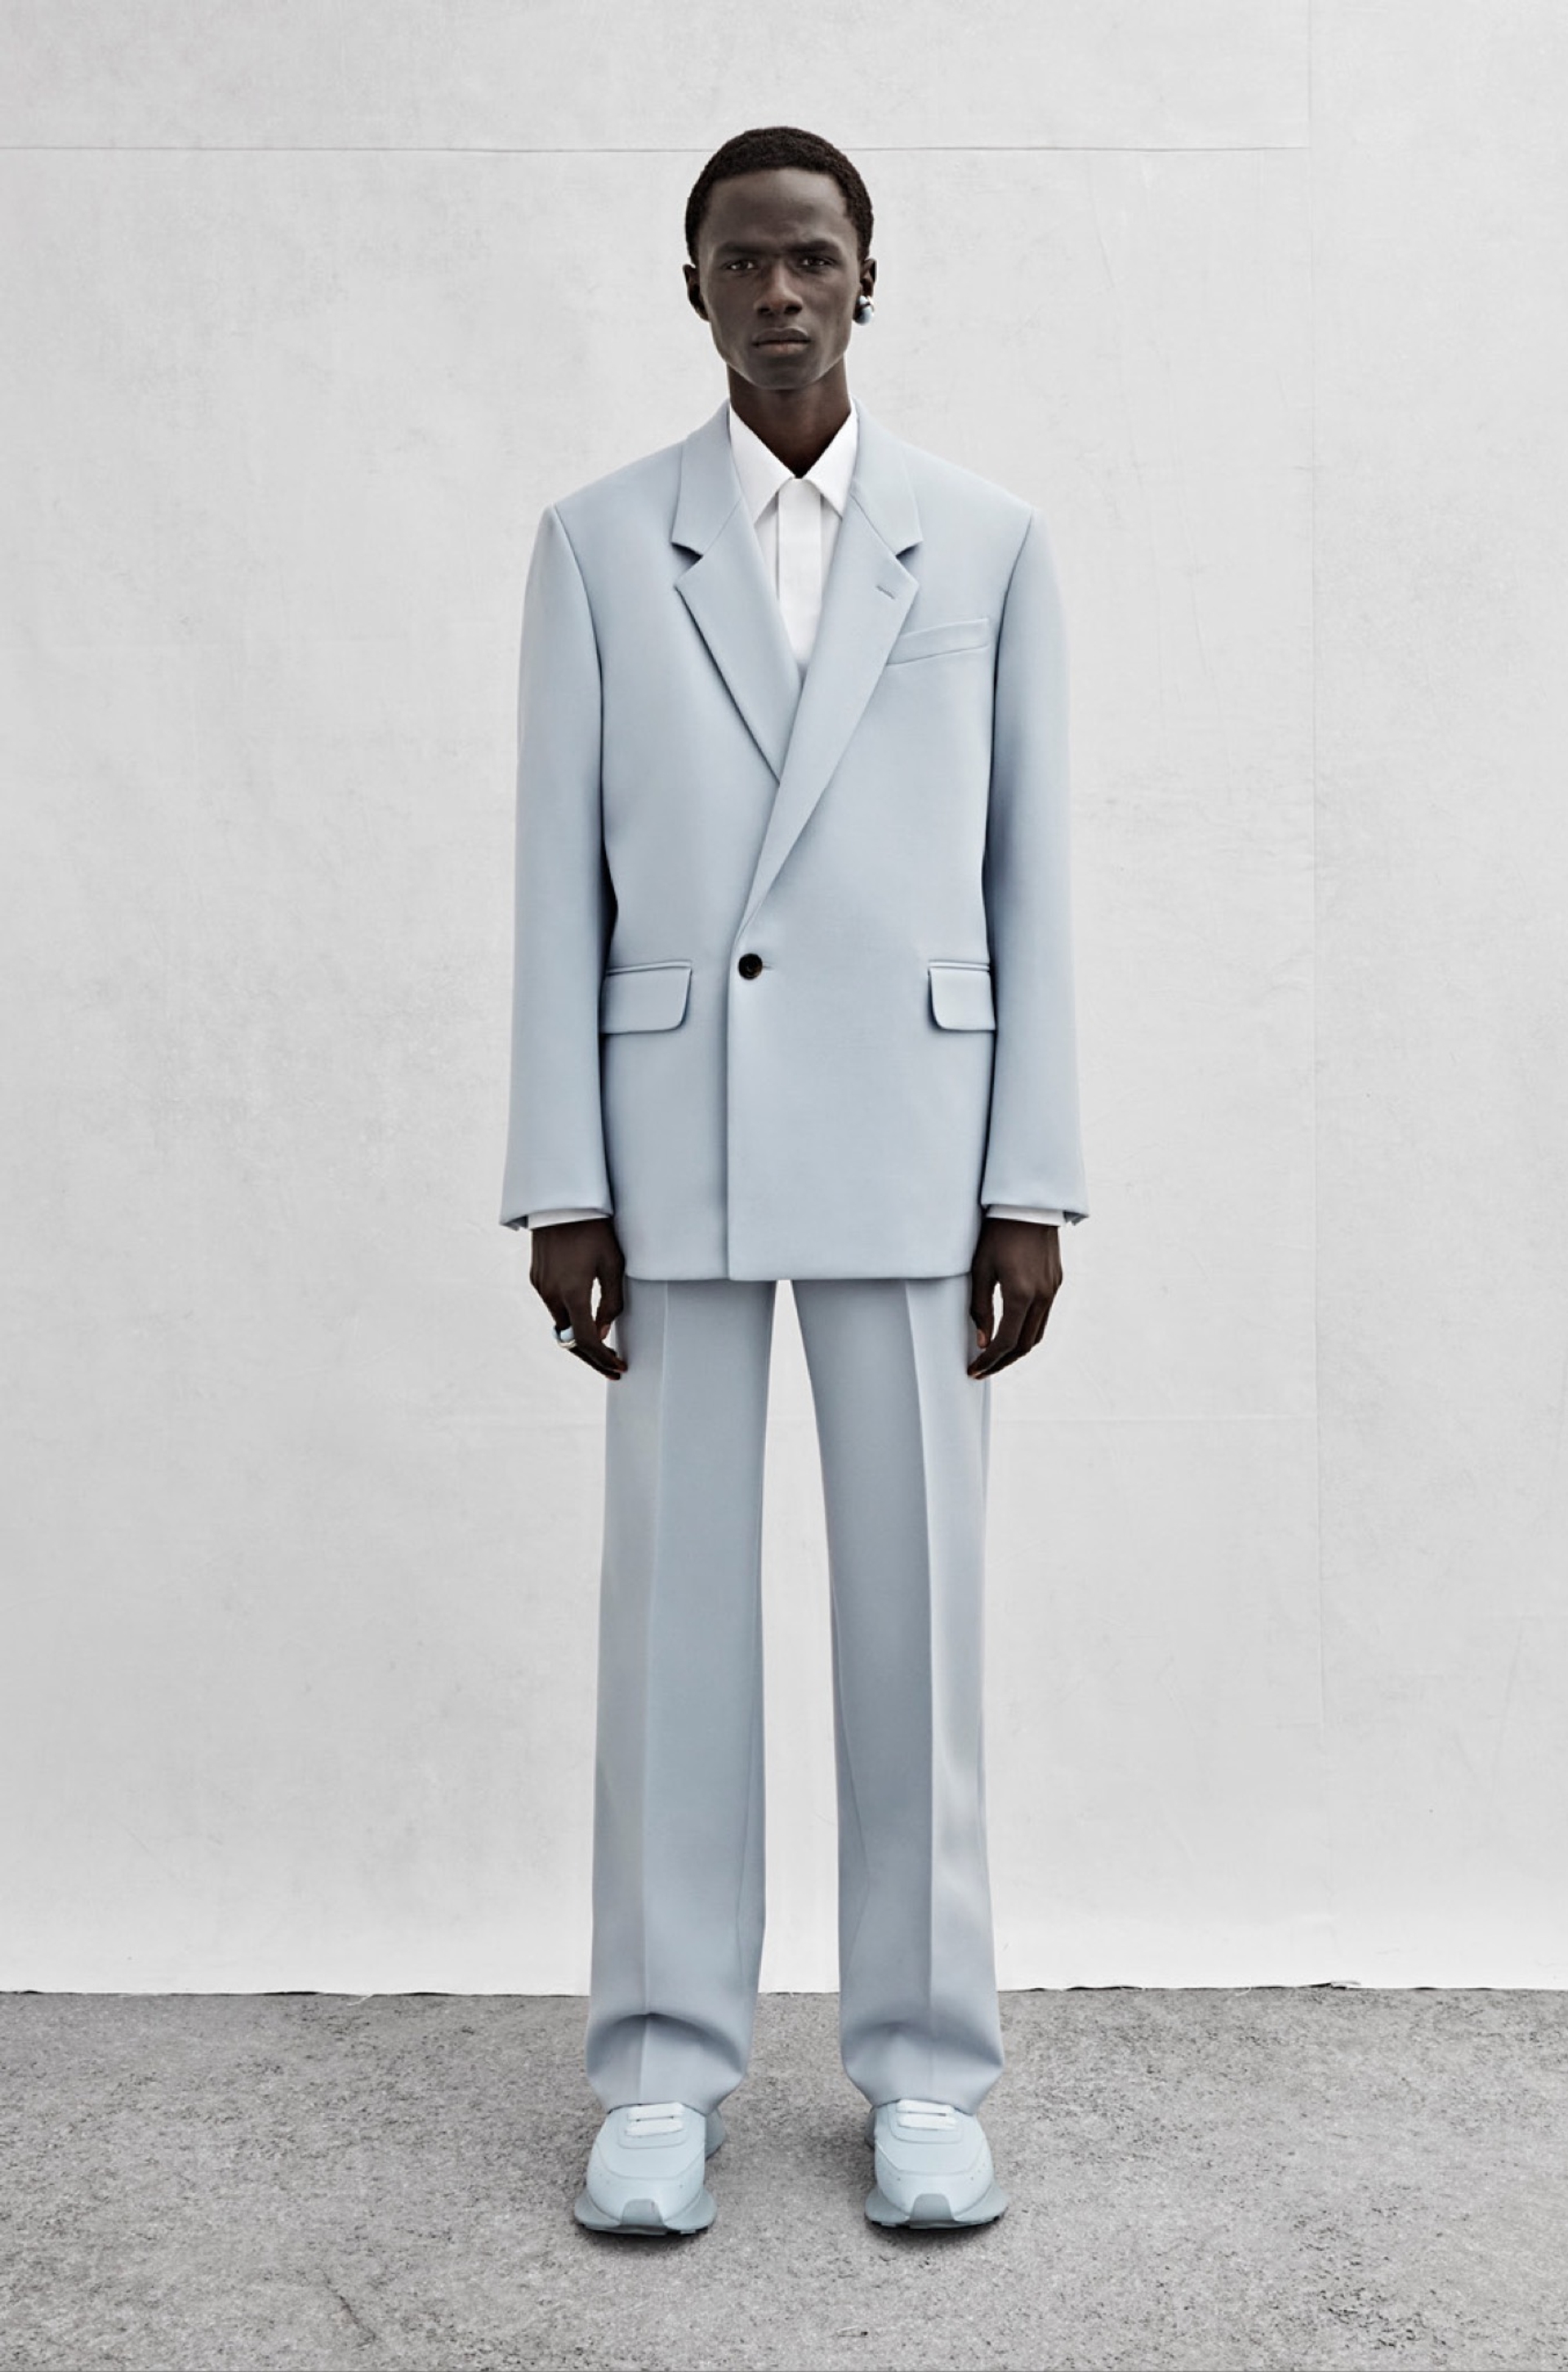 An oversized double-breasted jacket in powder blue wool, a shirt in white cotton poplin and wide-legged trousers in powder blue wool.